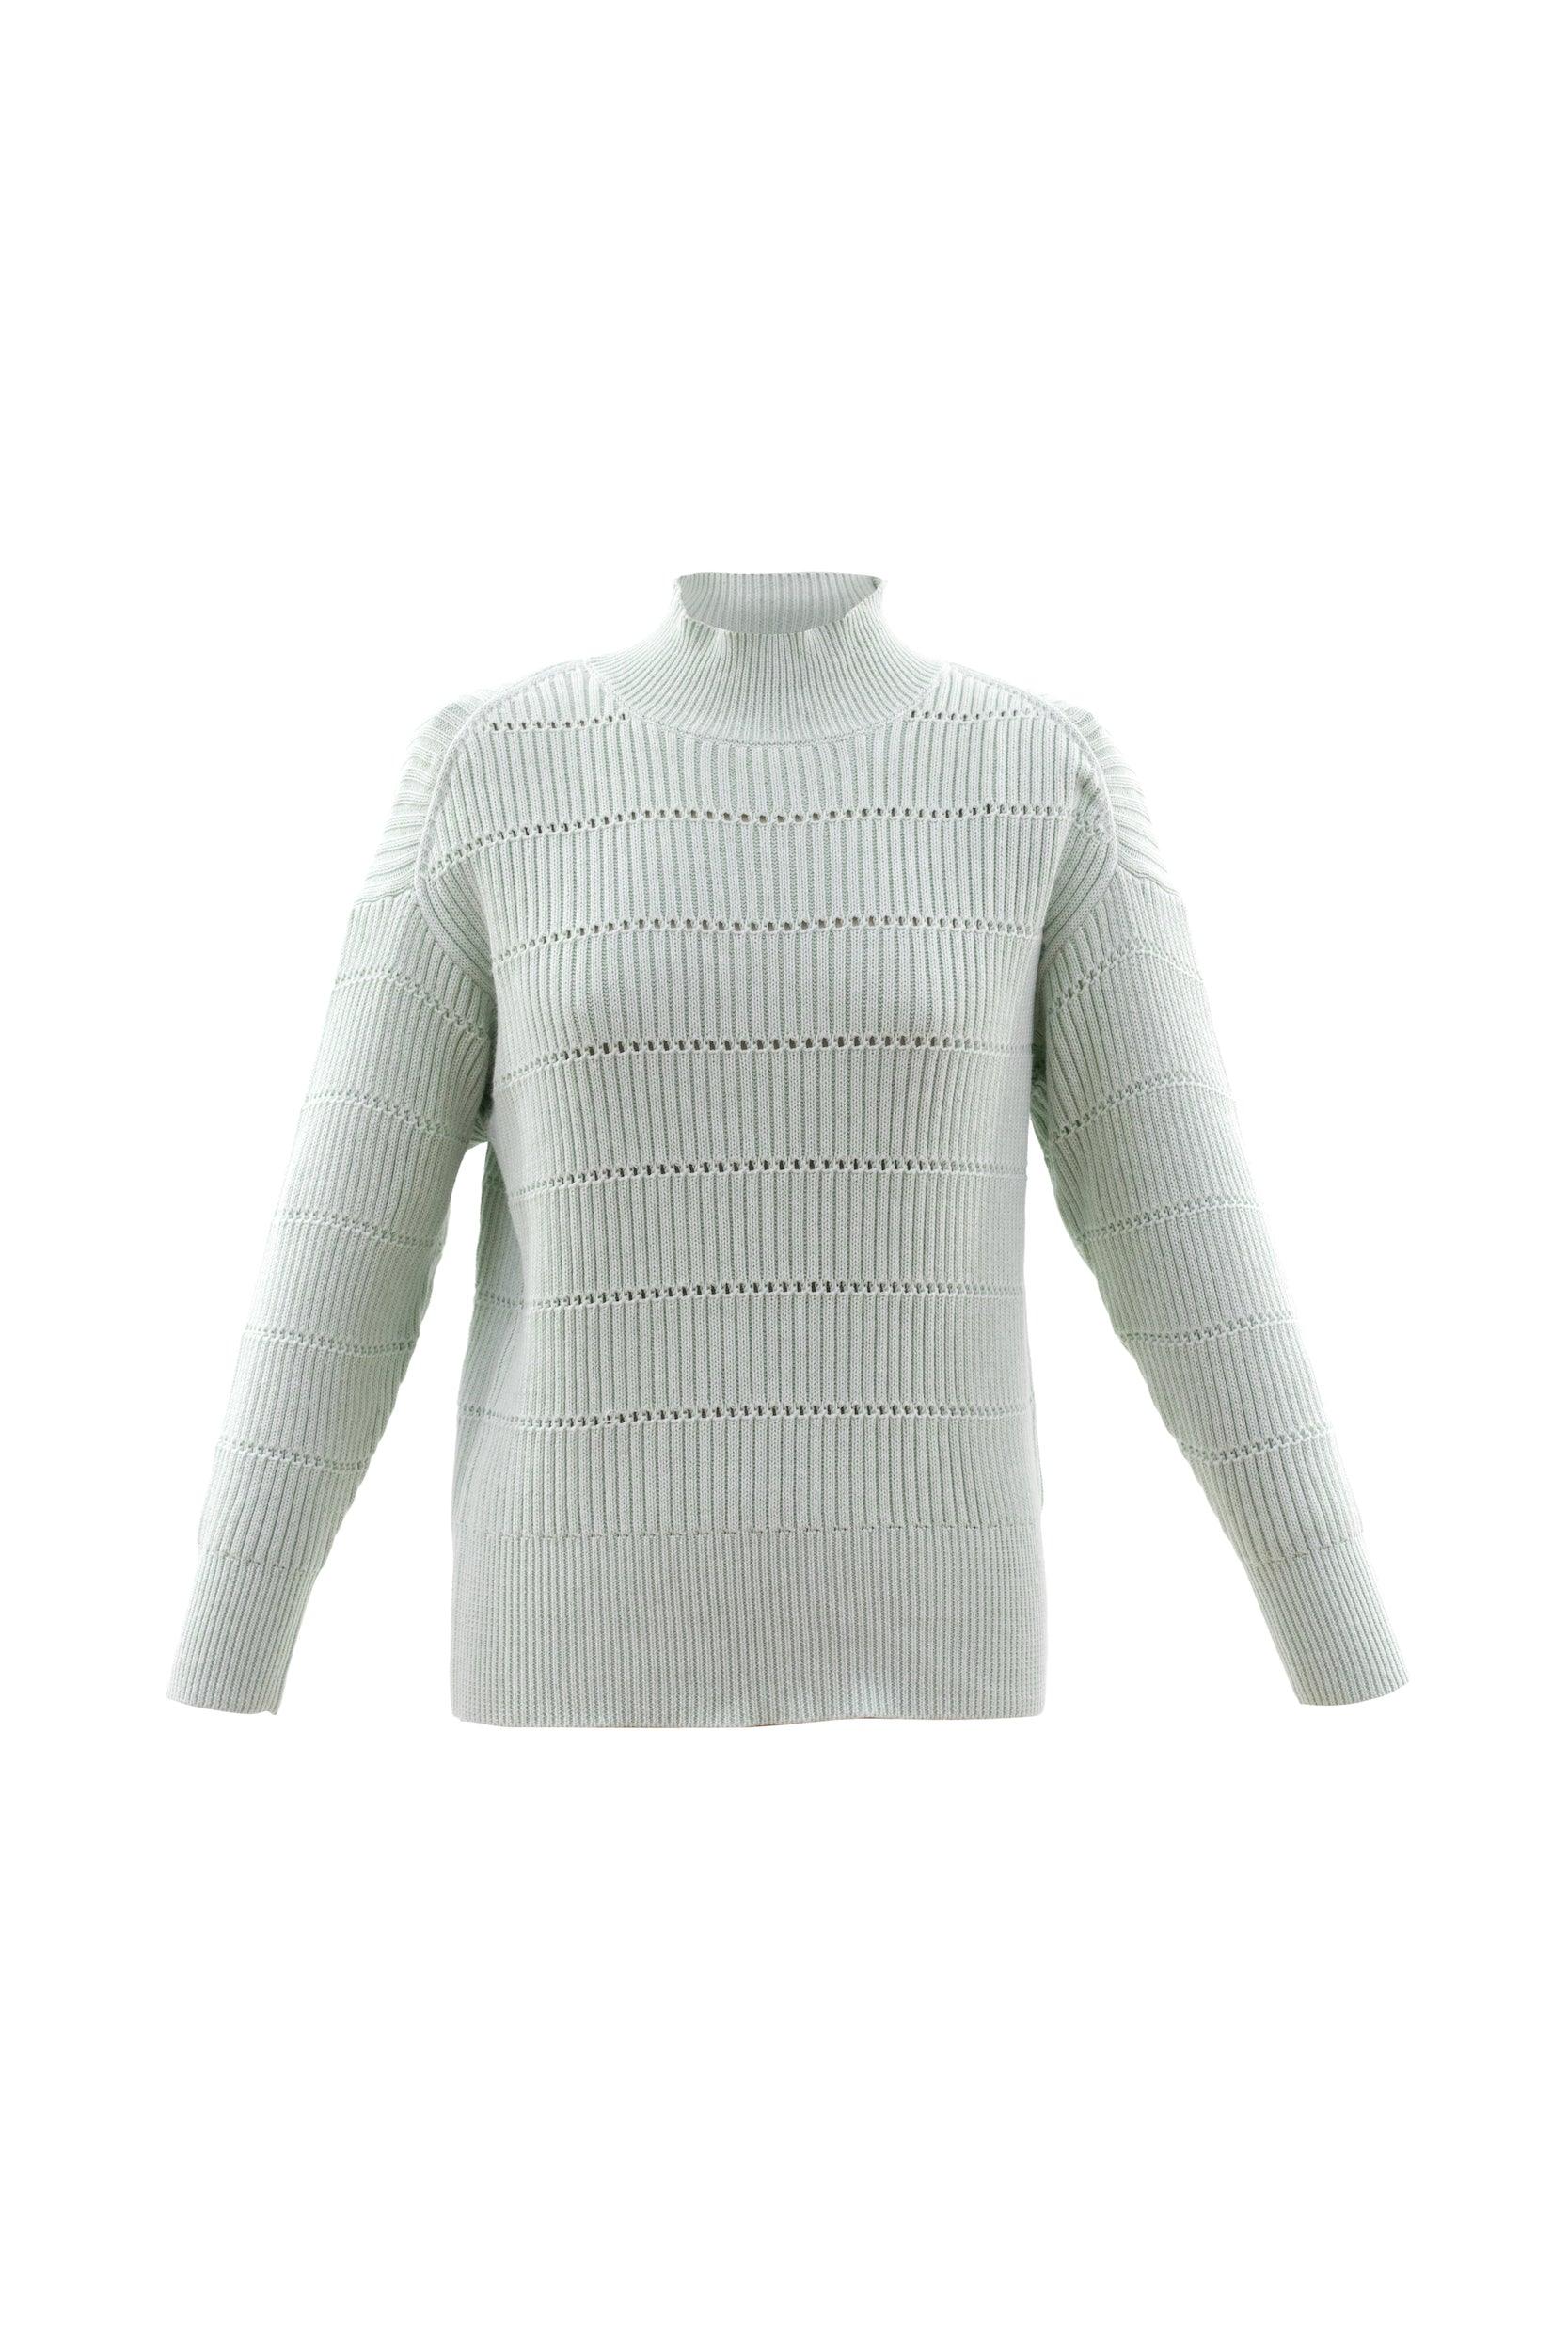 MARBLE RIBBED KNIT 5896 MINT freeshipping - Solitaire Fashions Darwen